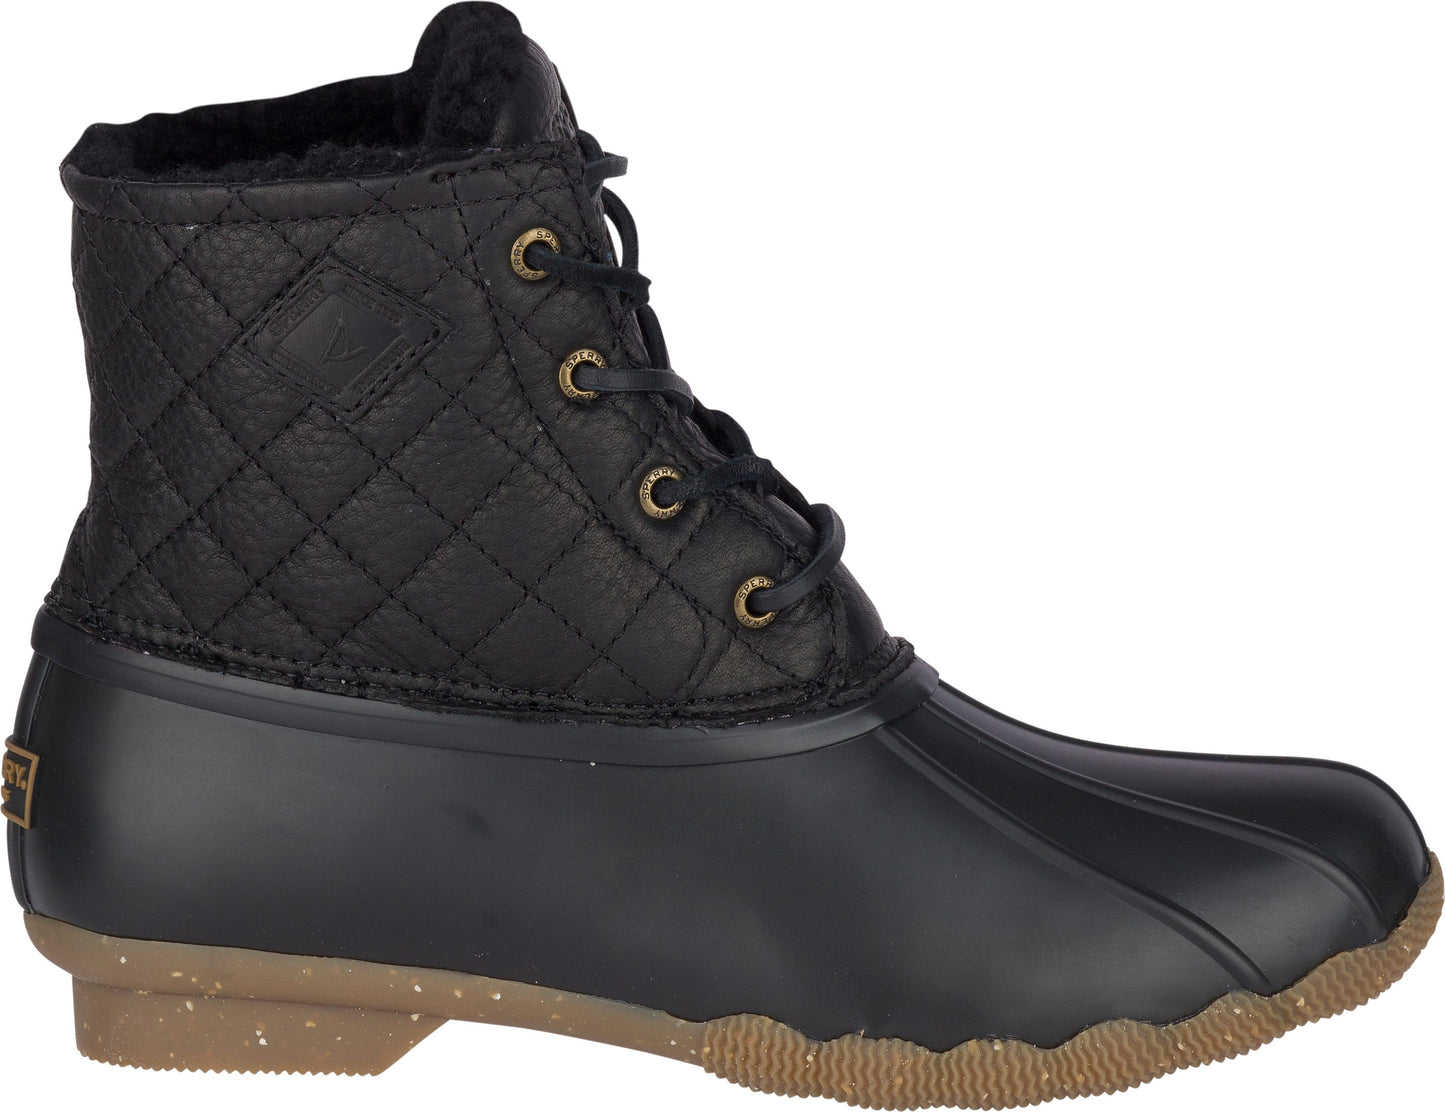 Sperry Shoes Saltwater Winter Lux Quilt Black